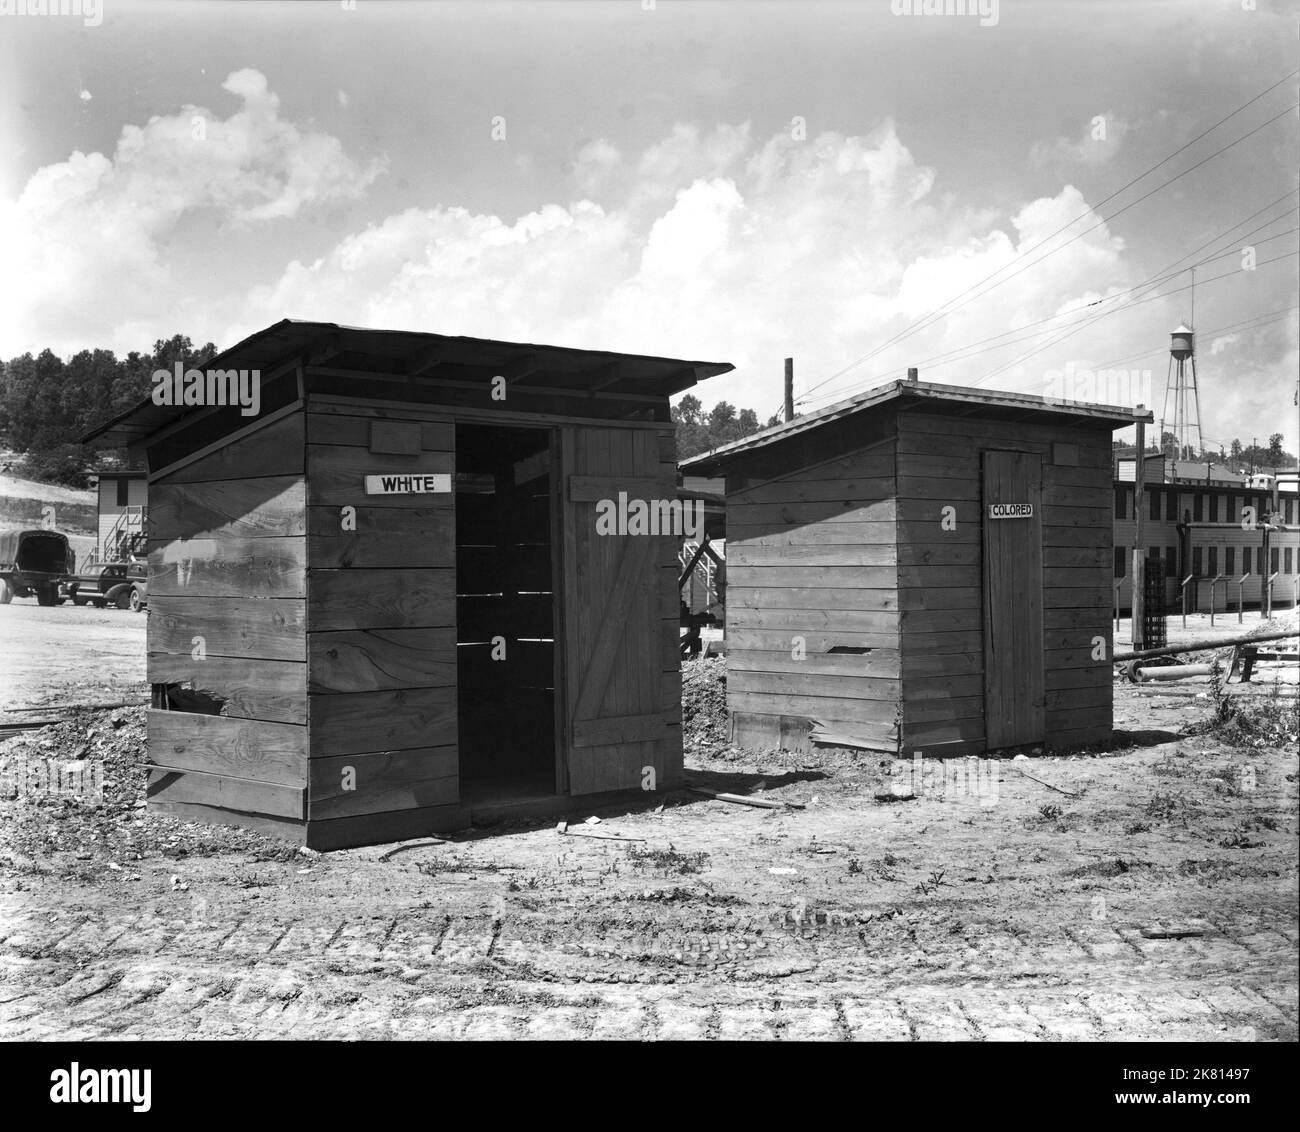 Ed Westcott / Department of Energy Oak Ridge - Photograph labelled White and Colored privies X-10 plant - 1943 Stock Photo